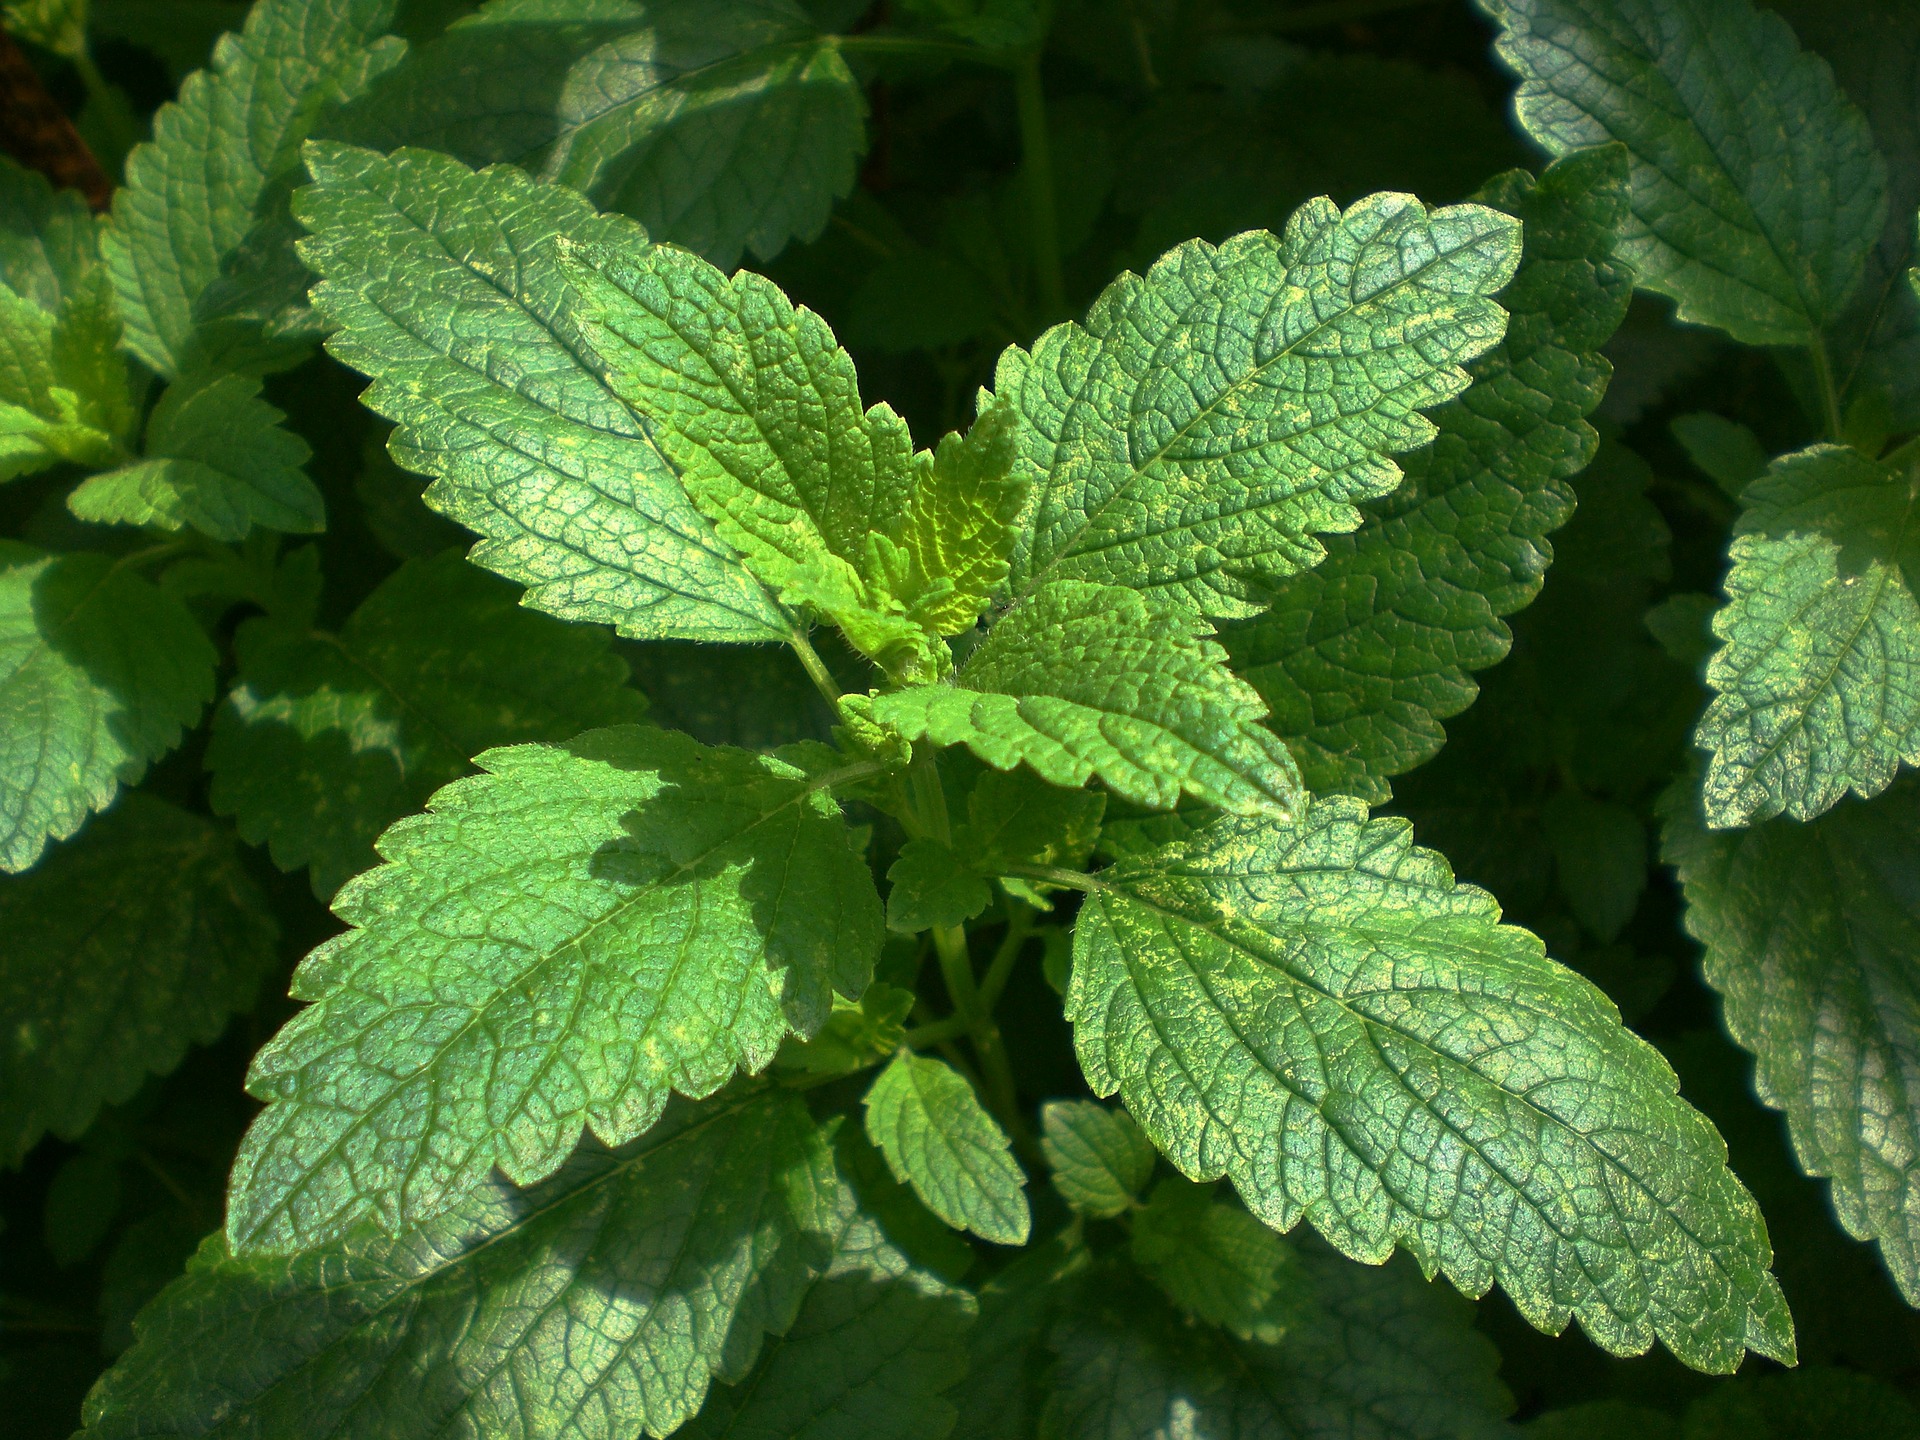 How to Use Lemon Balm for Stress, Tension and Anxiety | Herbal Remedies | Home Remedies | Herbal Tea Recipes | How to Make a Lemon Balm Tincture | How to Make a Lemon Balm Glycerite | My Healthy Homemade Life 